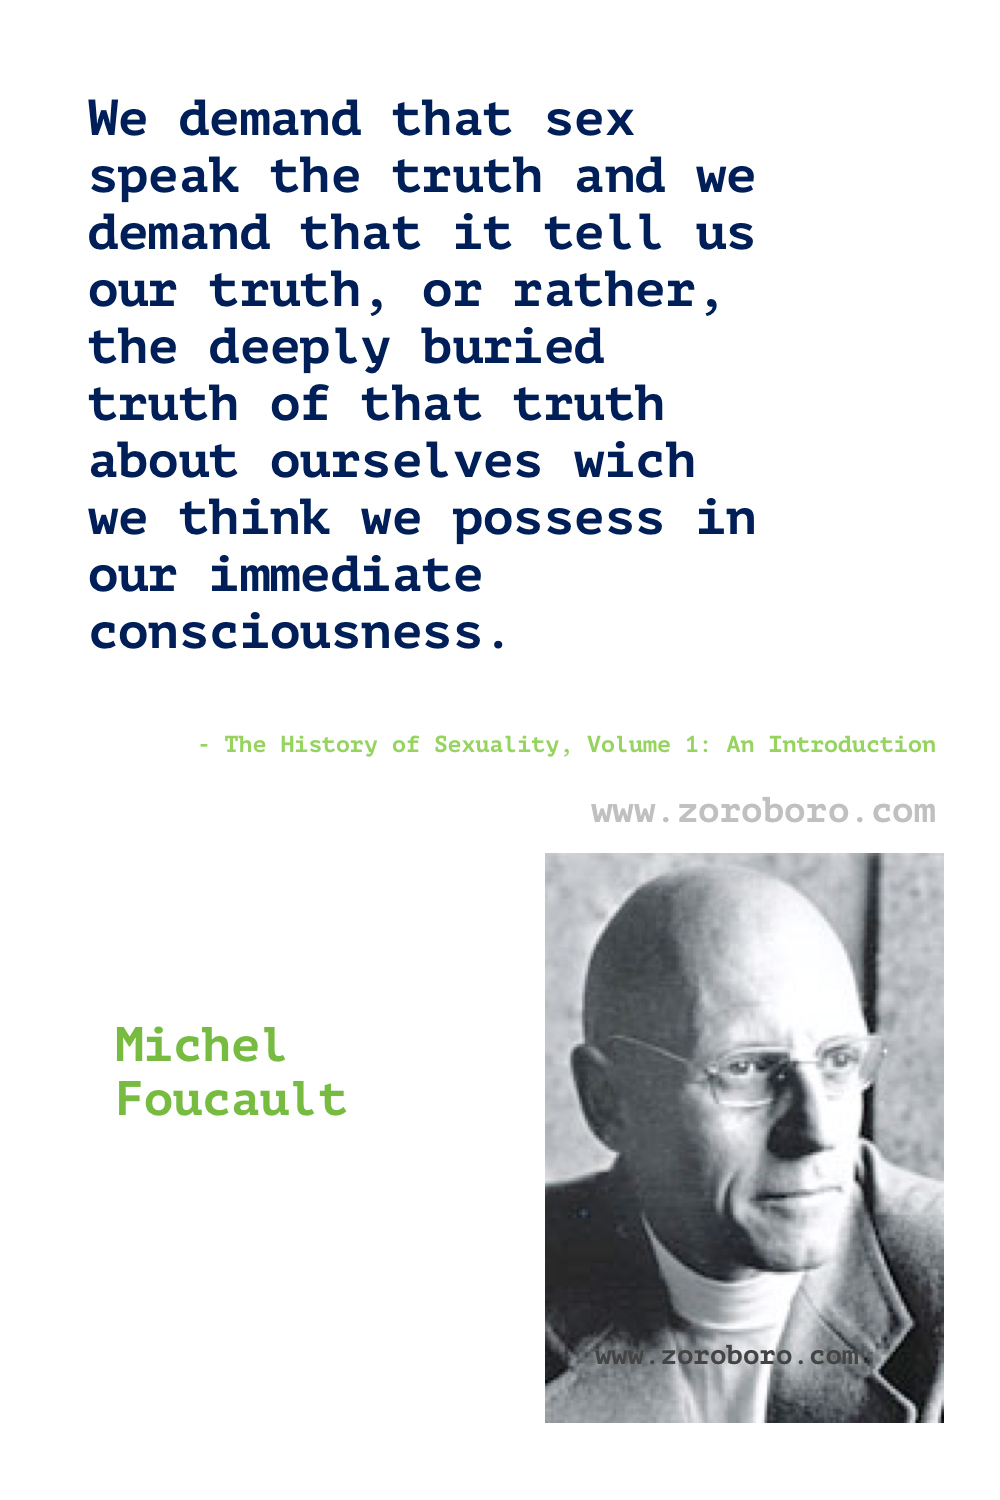 Michel Foucault Quotes. Michel Foucault Quotes. Michel Foucault Books Quotes. Michel Foucault Power, Politics Quotes. Michel Foucault Philosophy, Michel Foucault Discipline and Punish, Madness and Civilization & The History of Sexuality